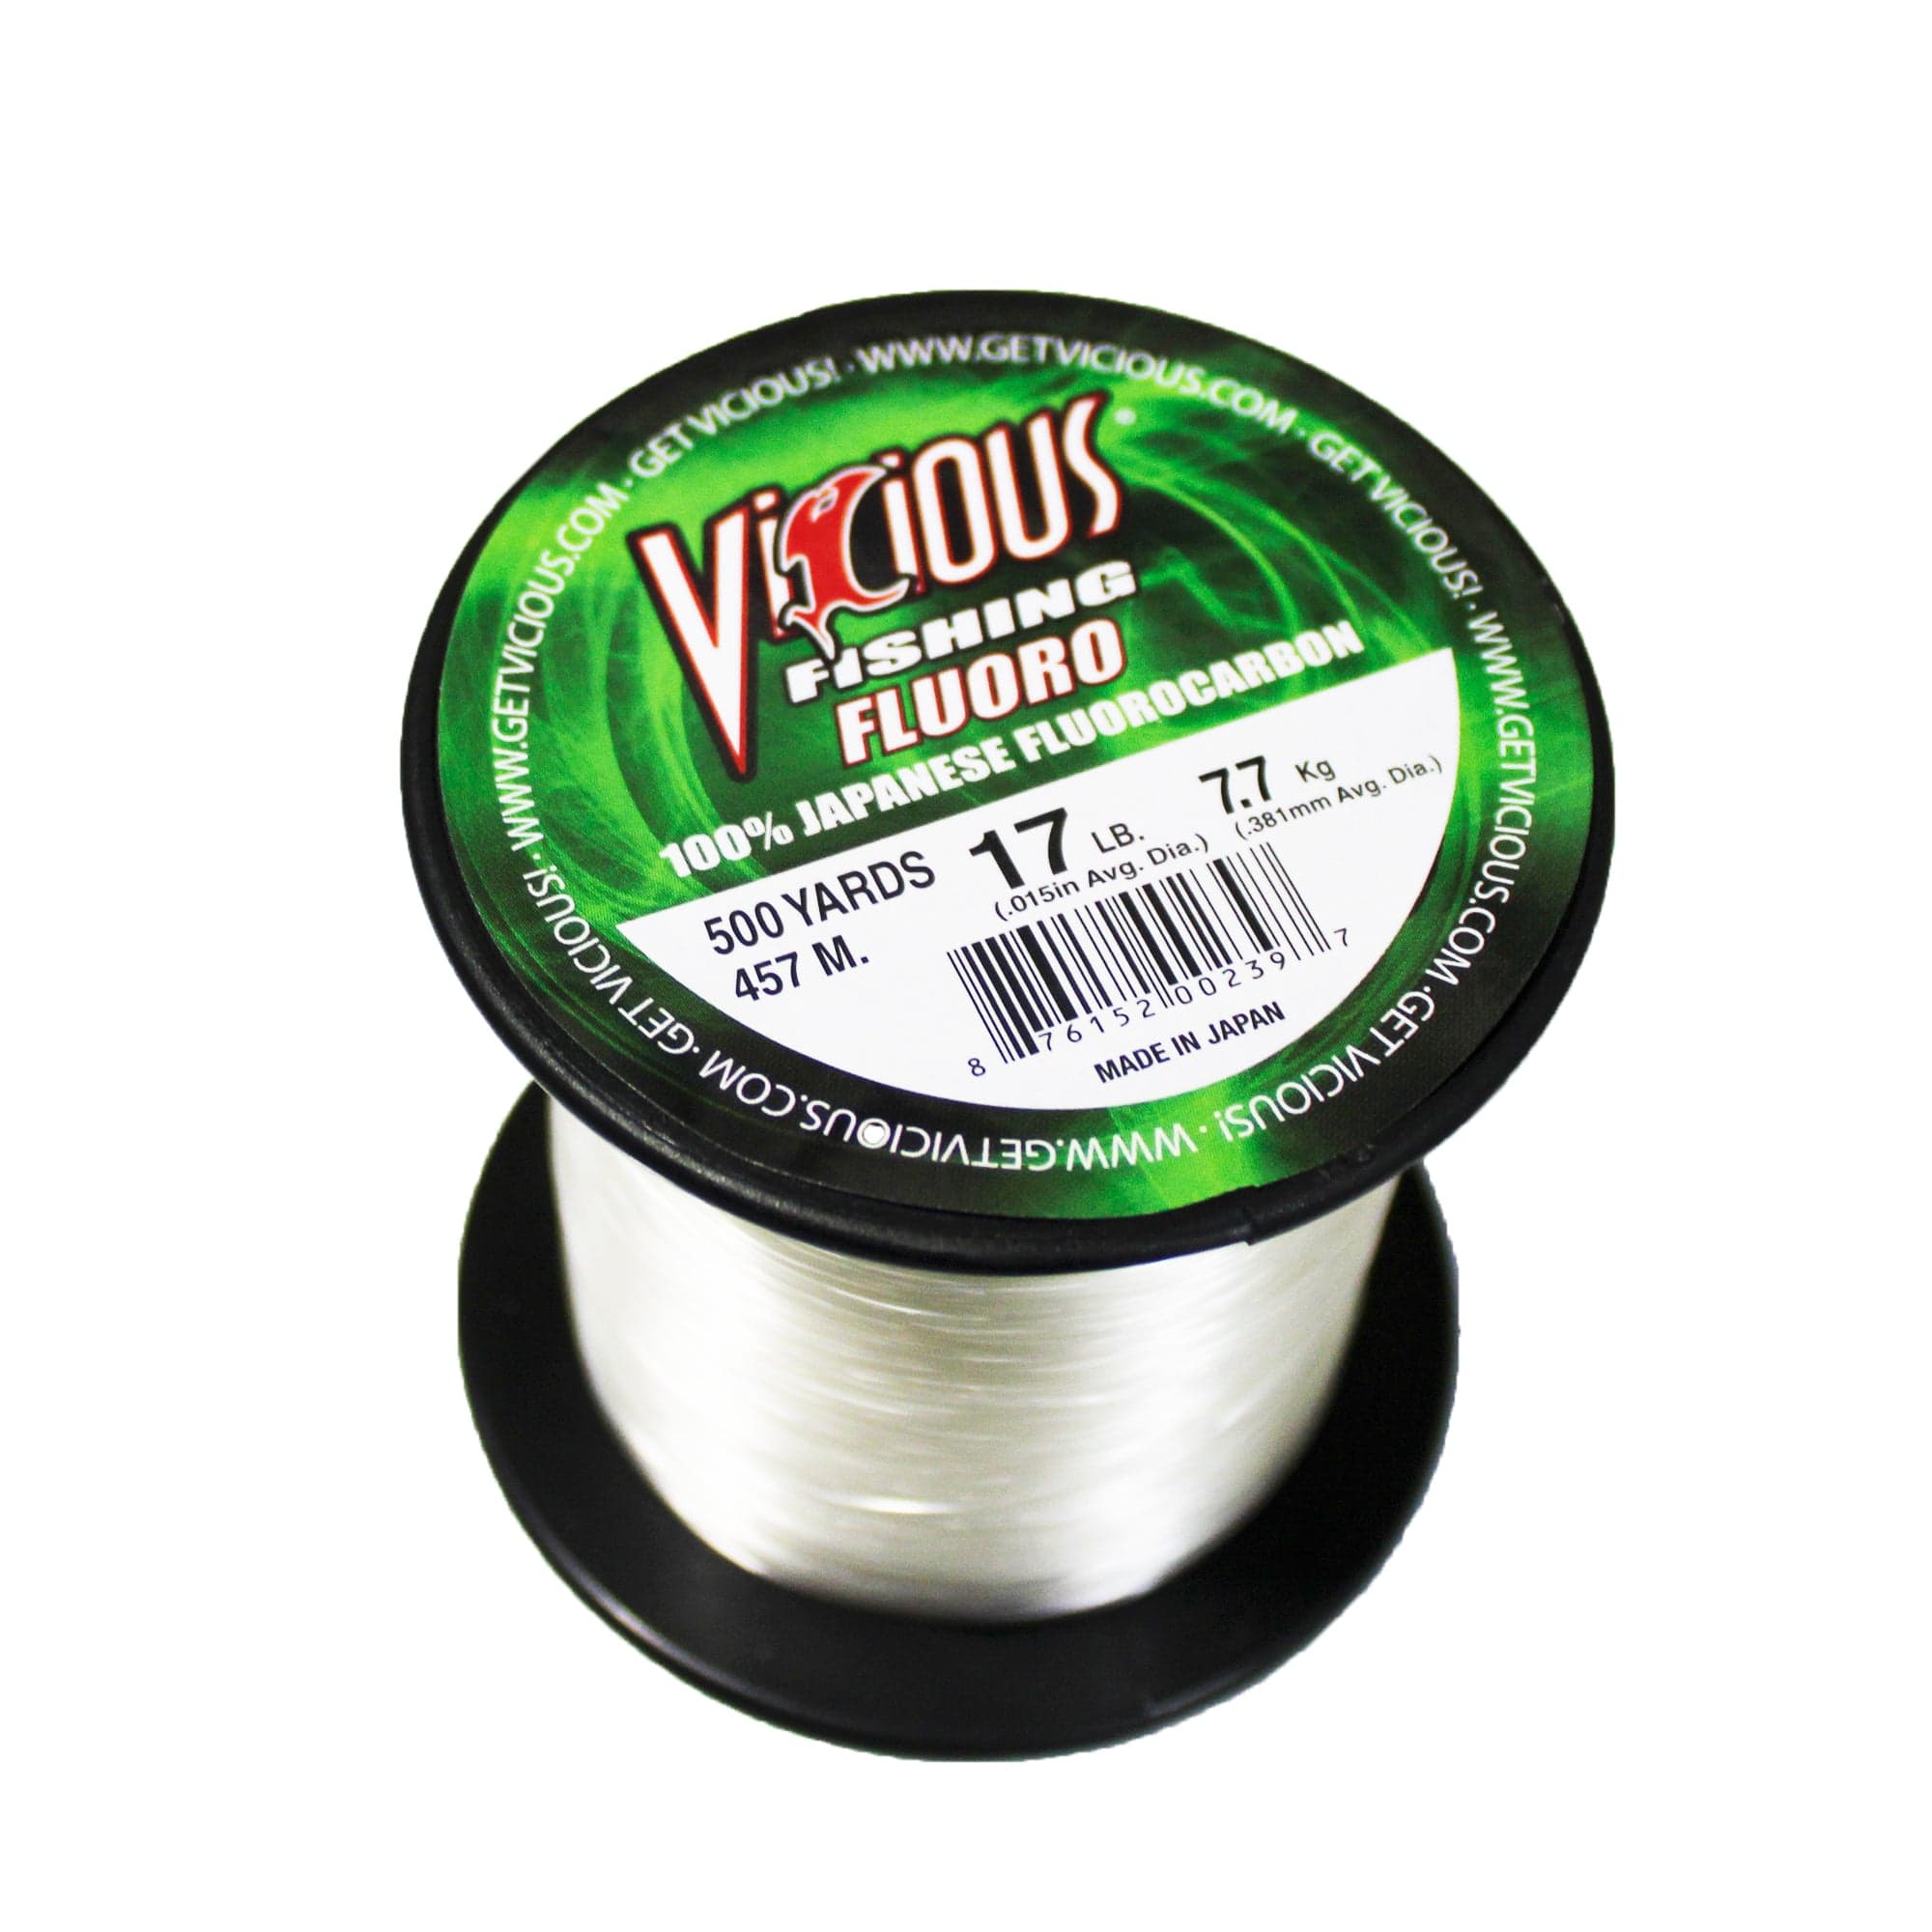 Vicious FLD 100% Fluorocarbon Fishing Line, 500 Yards - Clear